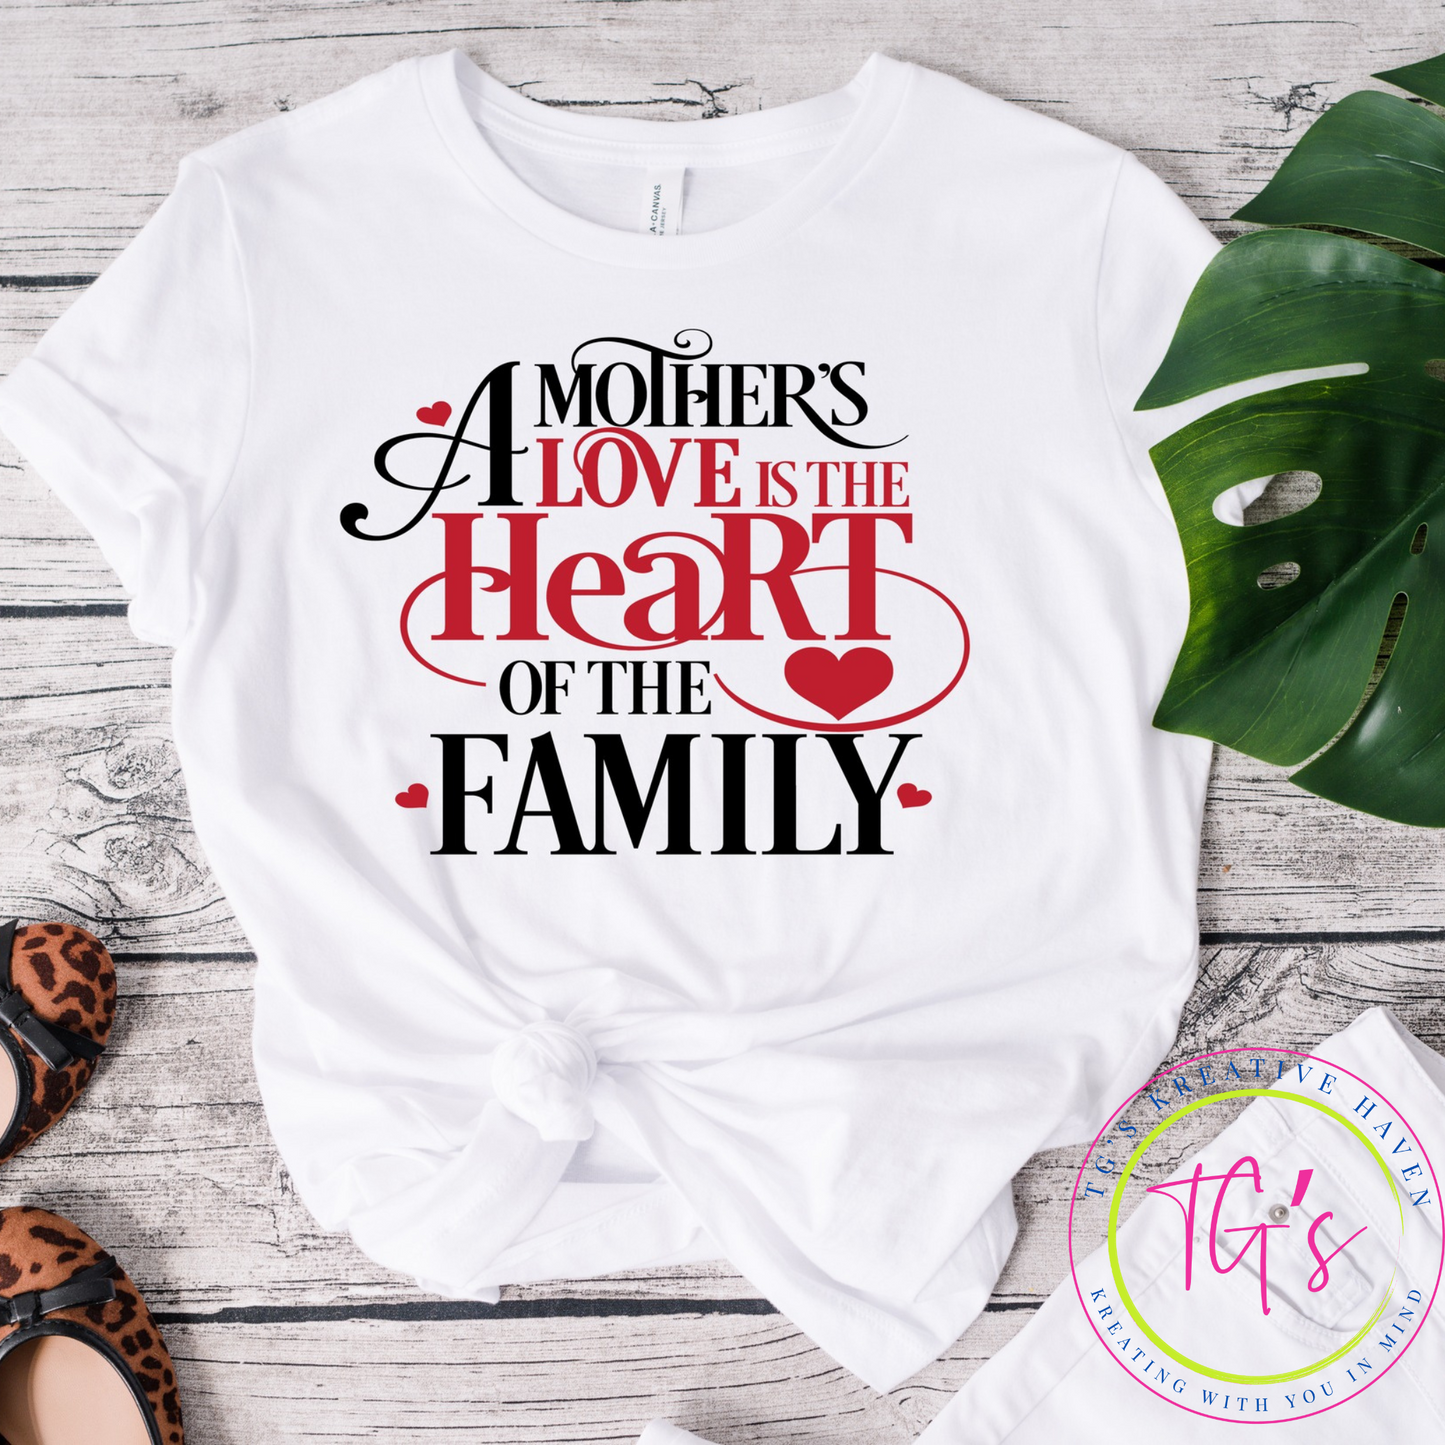 A Mother's Love is the Heart of the Family Tee